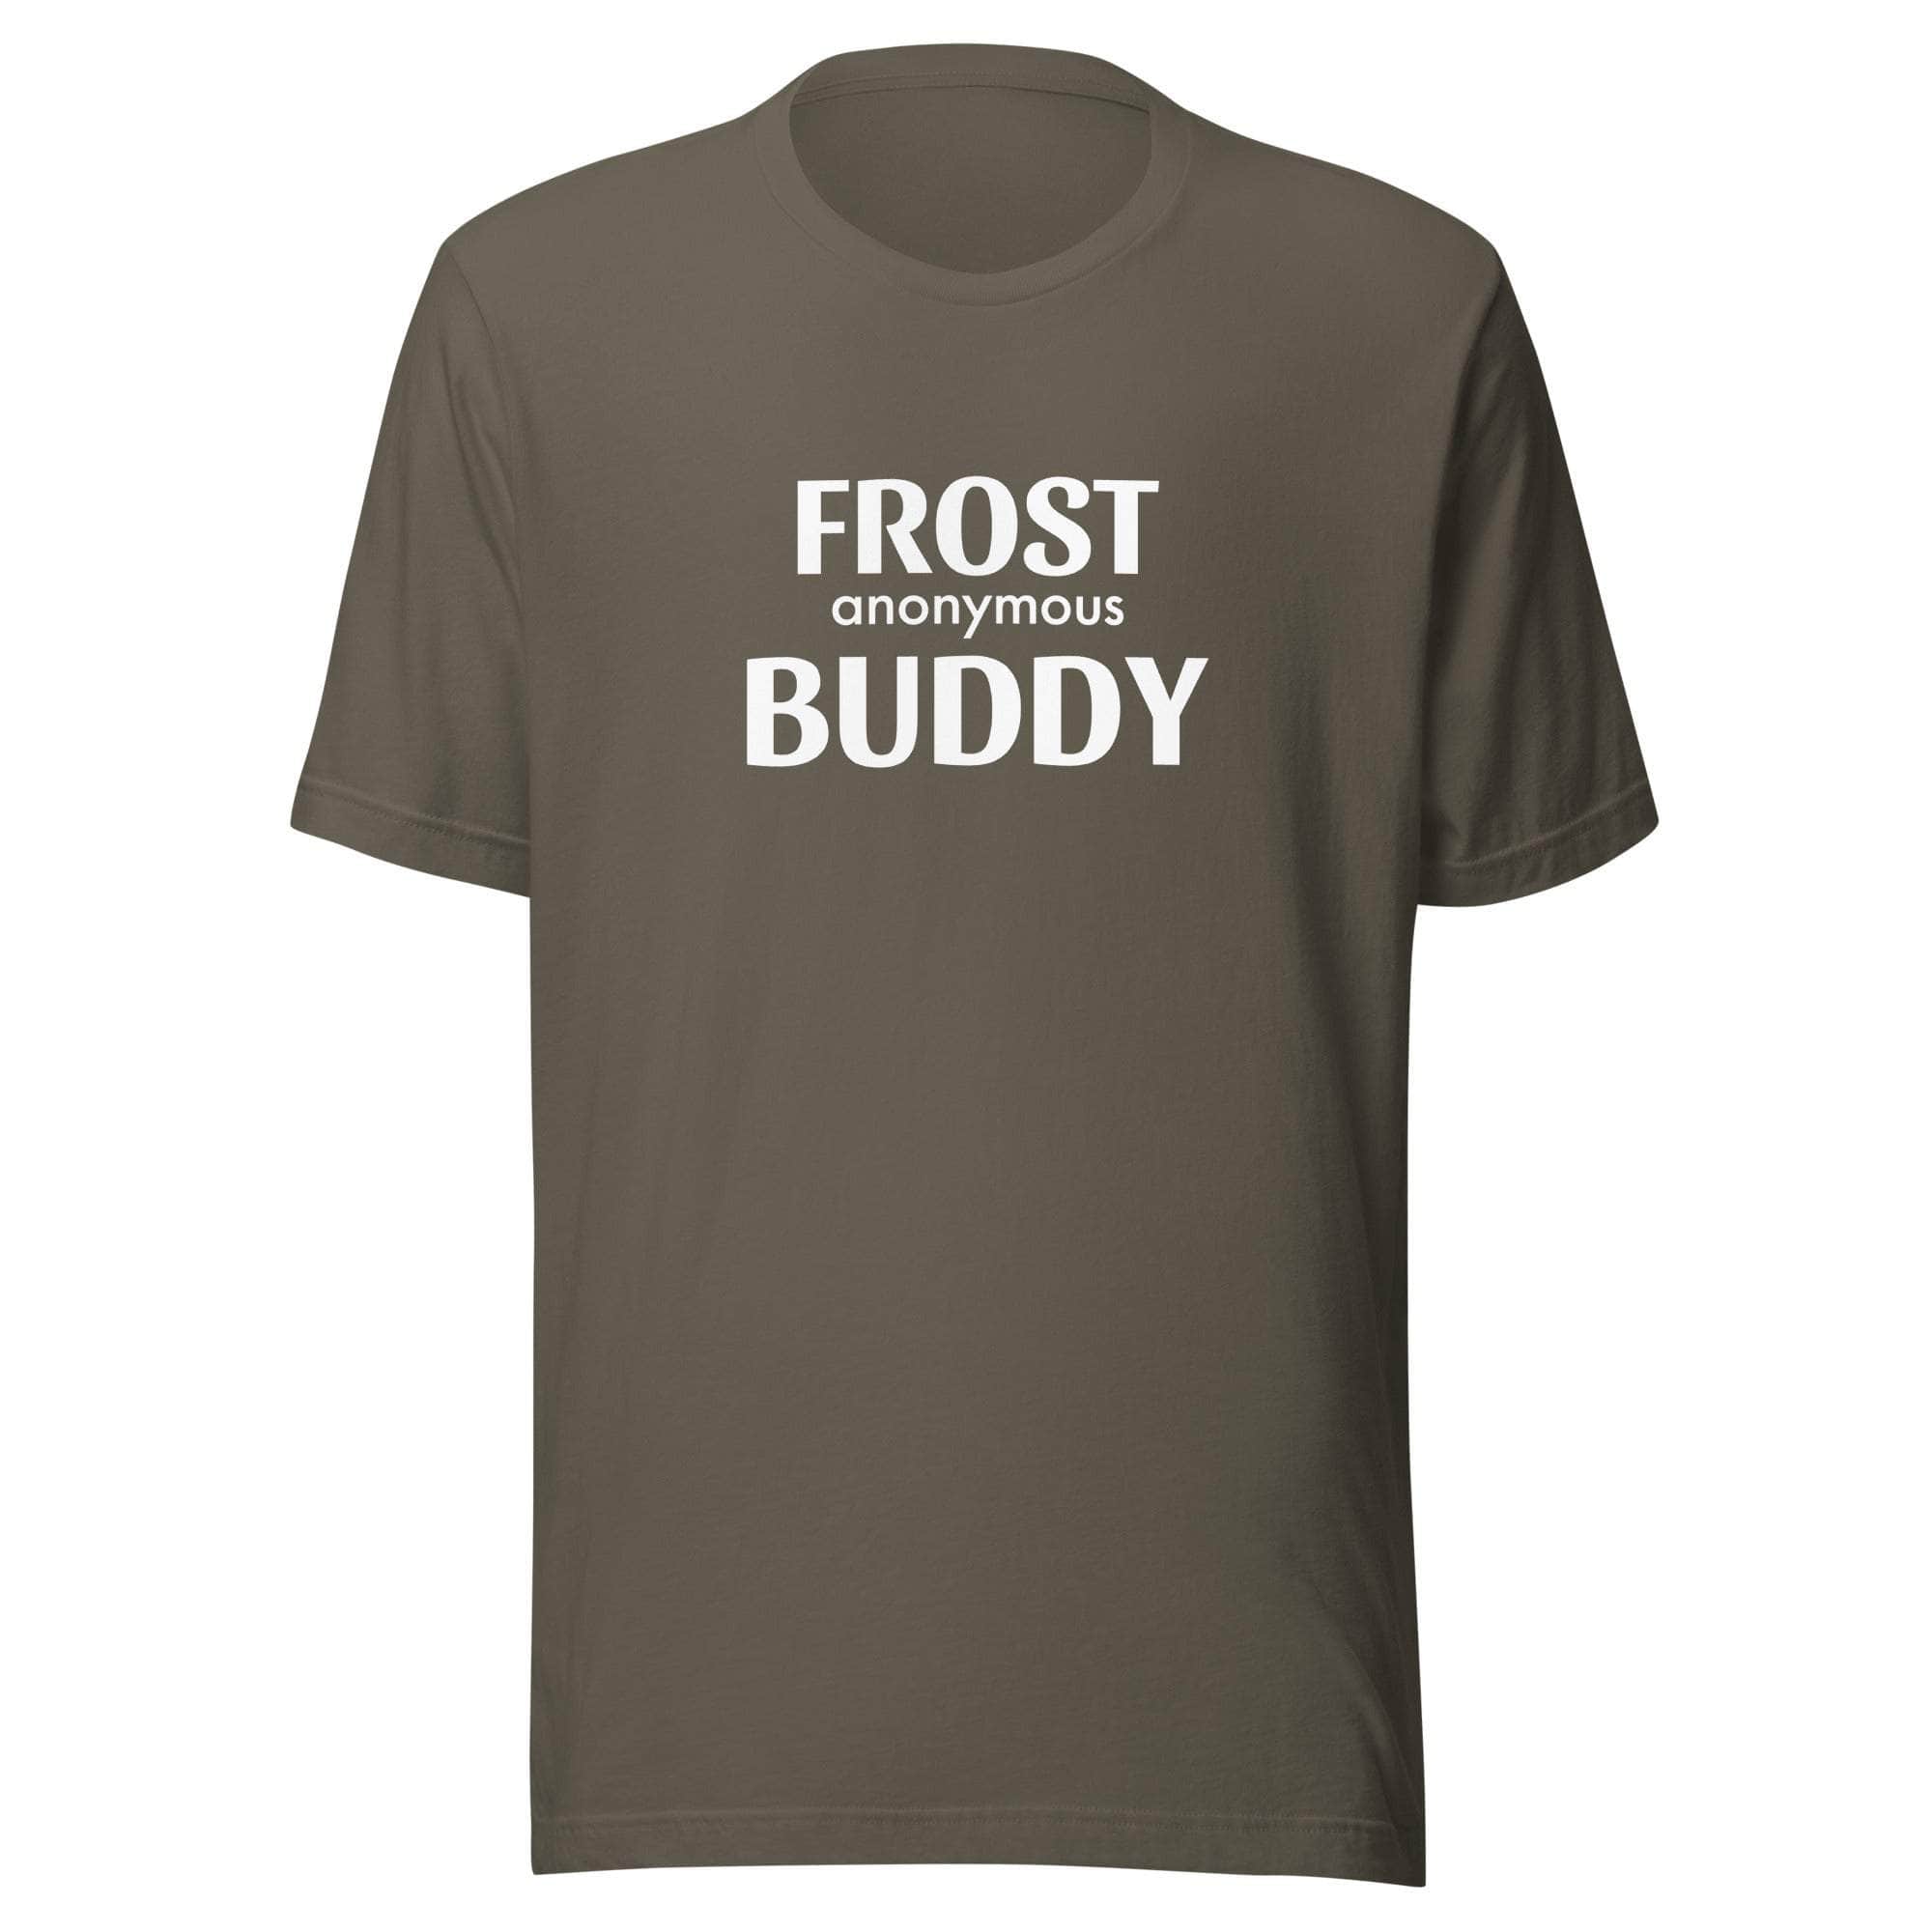 Frost Buddy  Army / S Frost Buddy Anonymous Unisex T-shirt